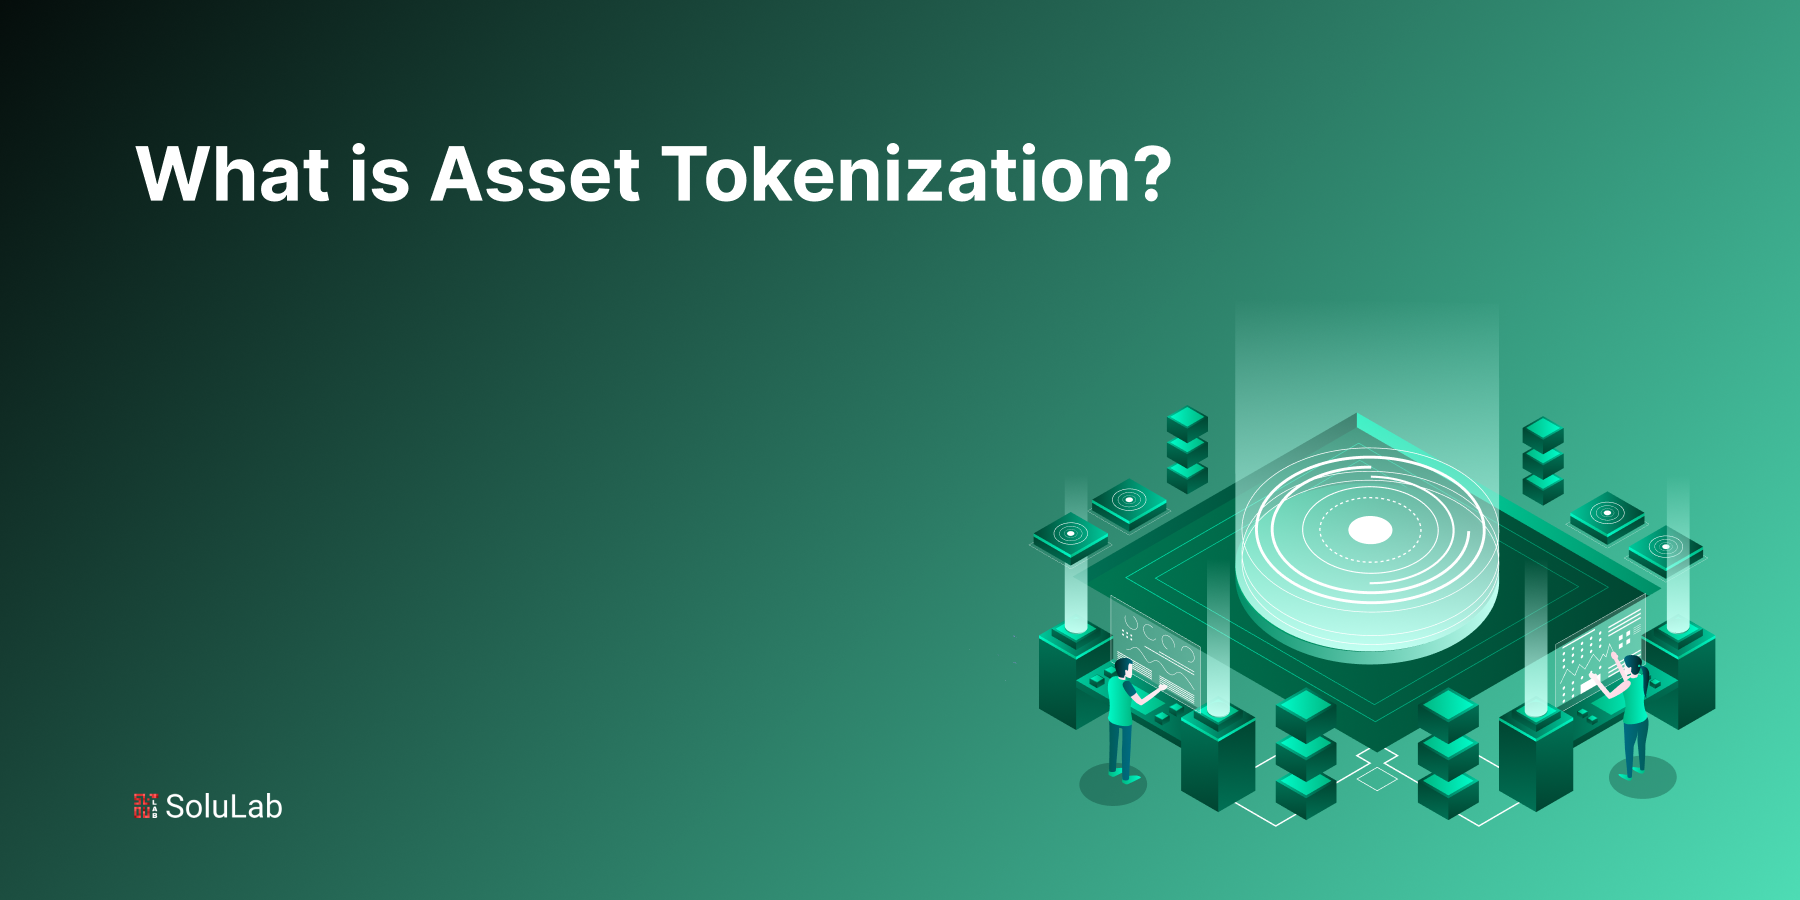 What is Asset Tokenization?